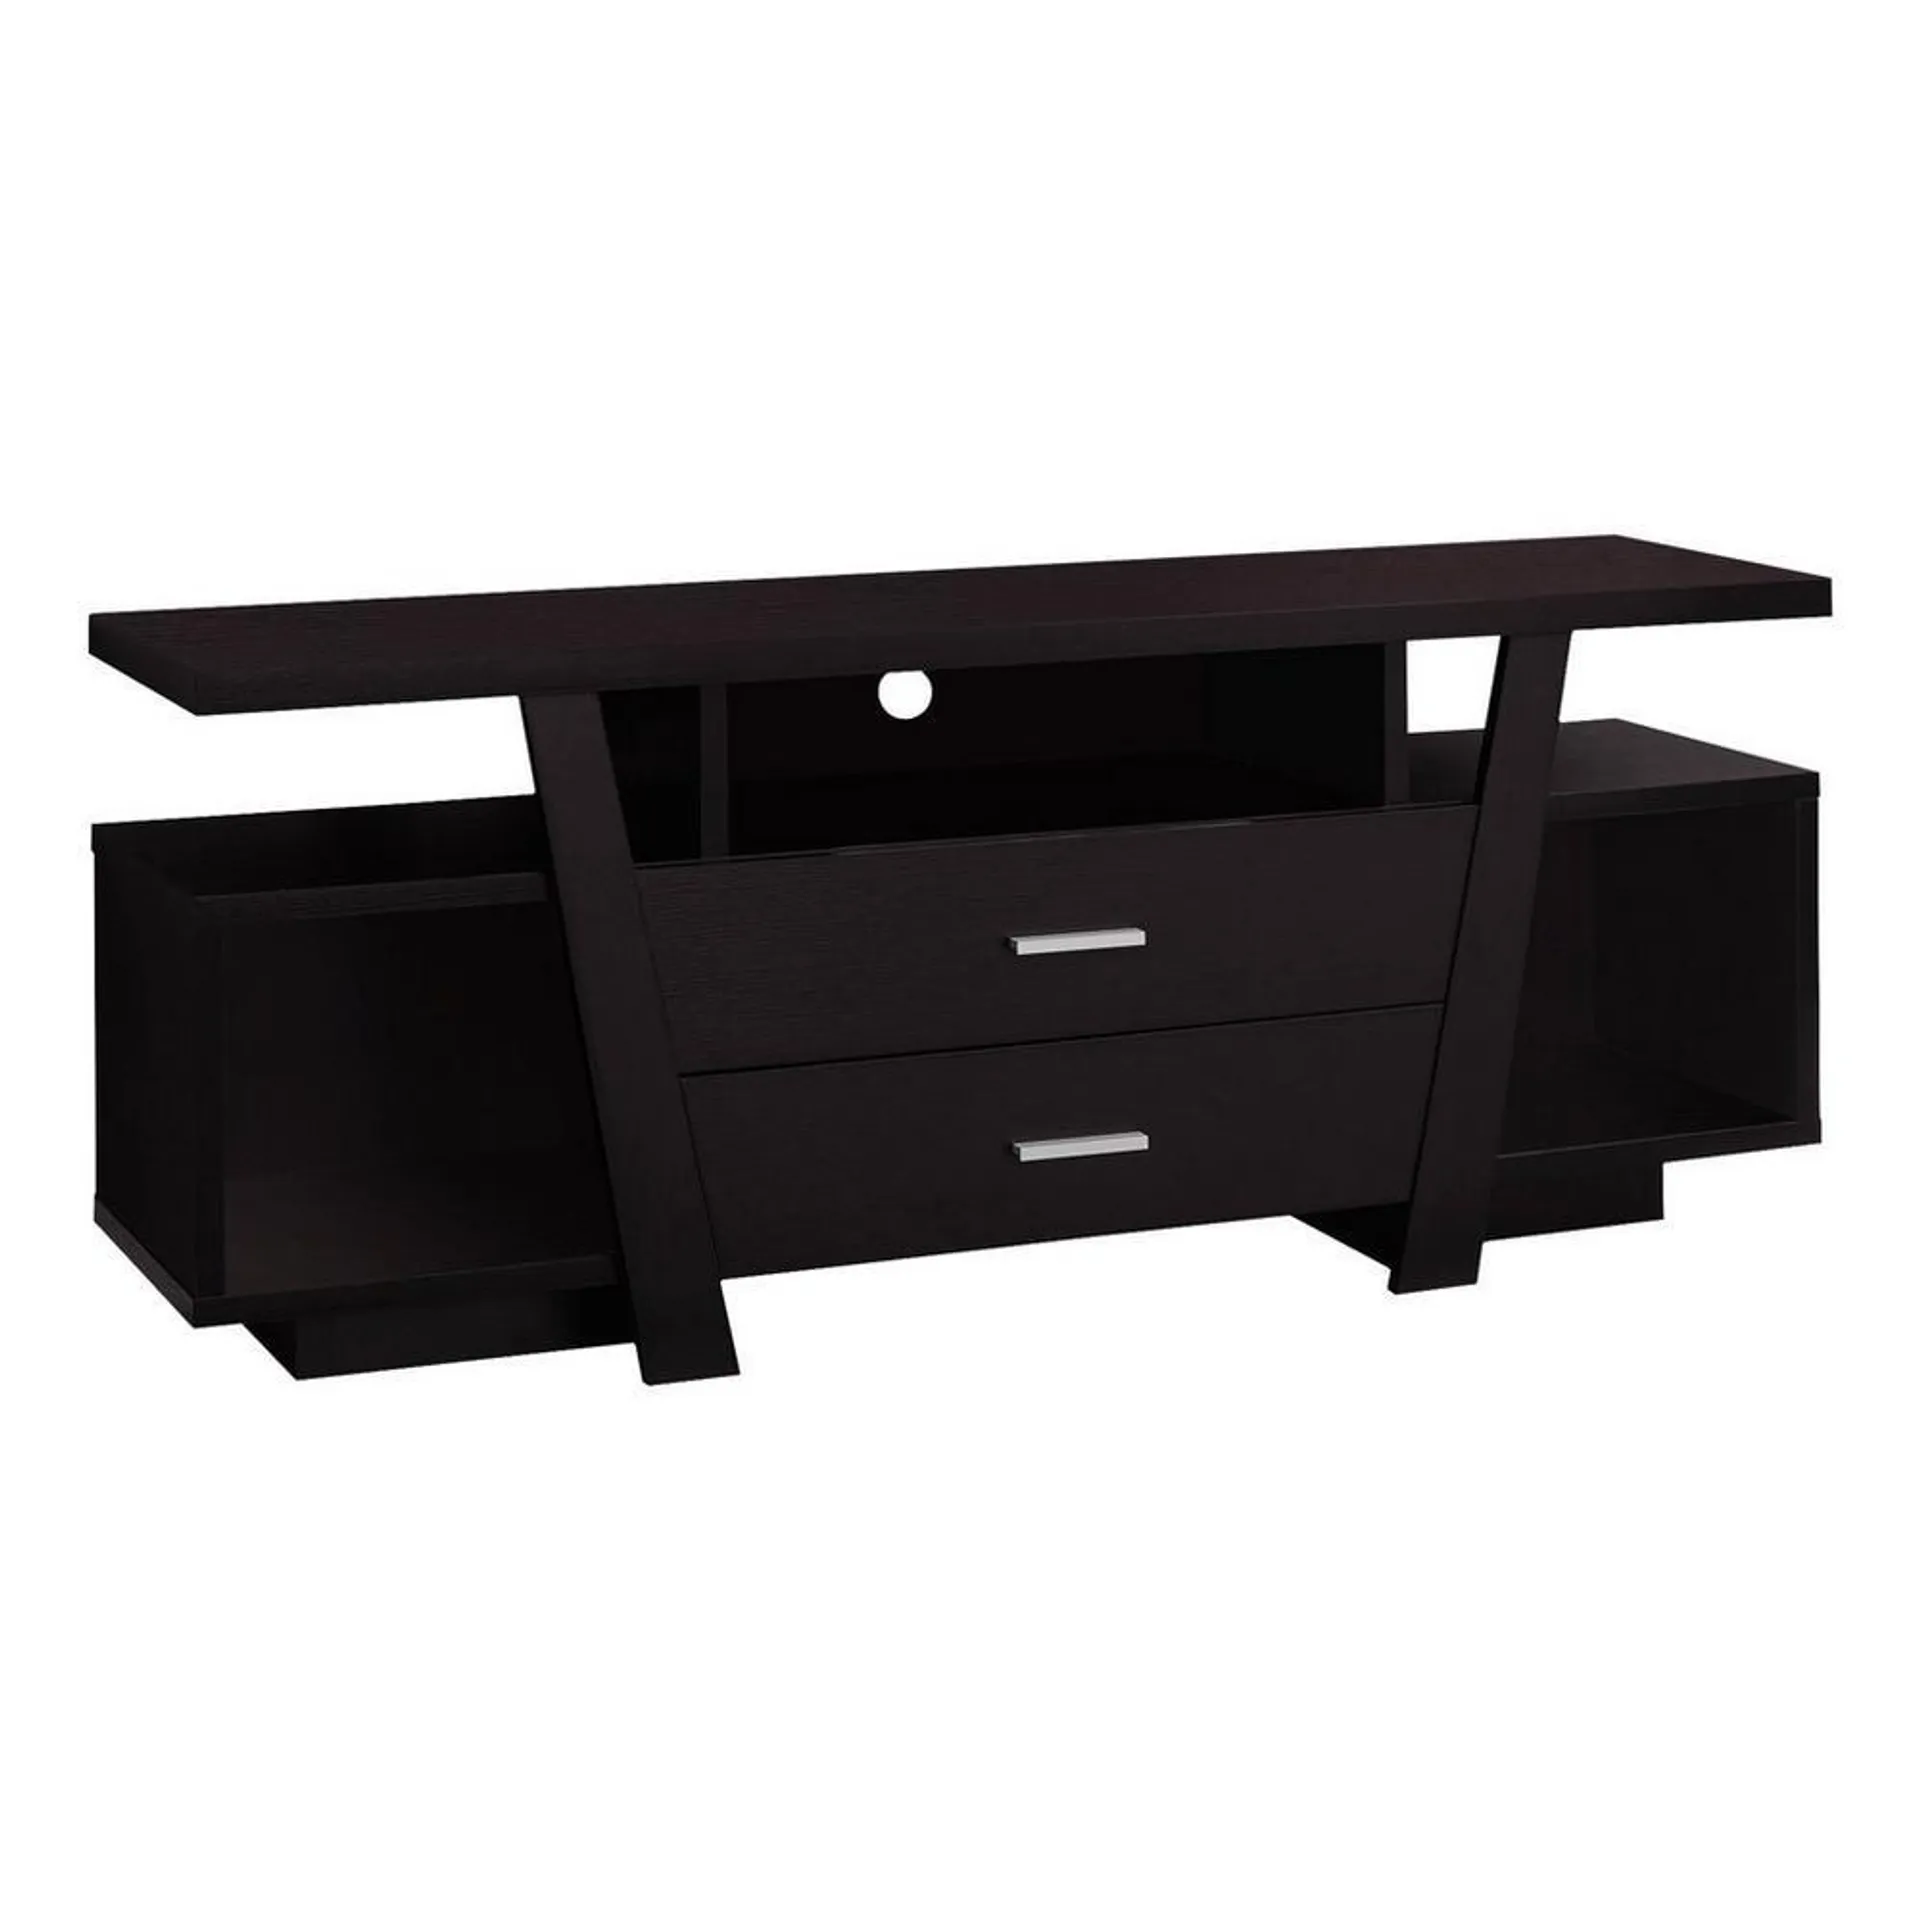 60" TV Stand with Drawers - Brown